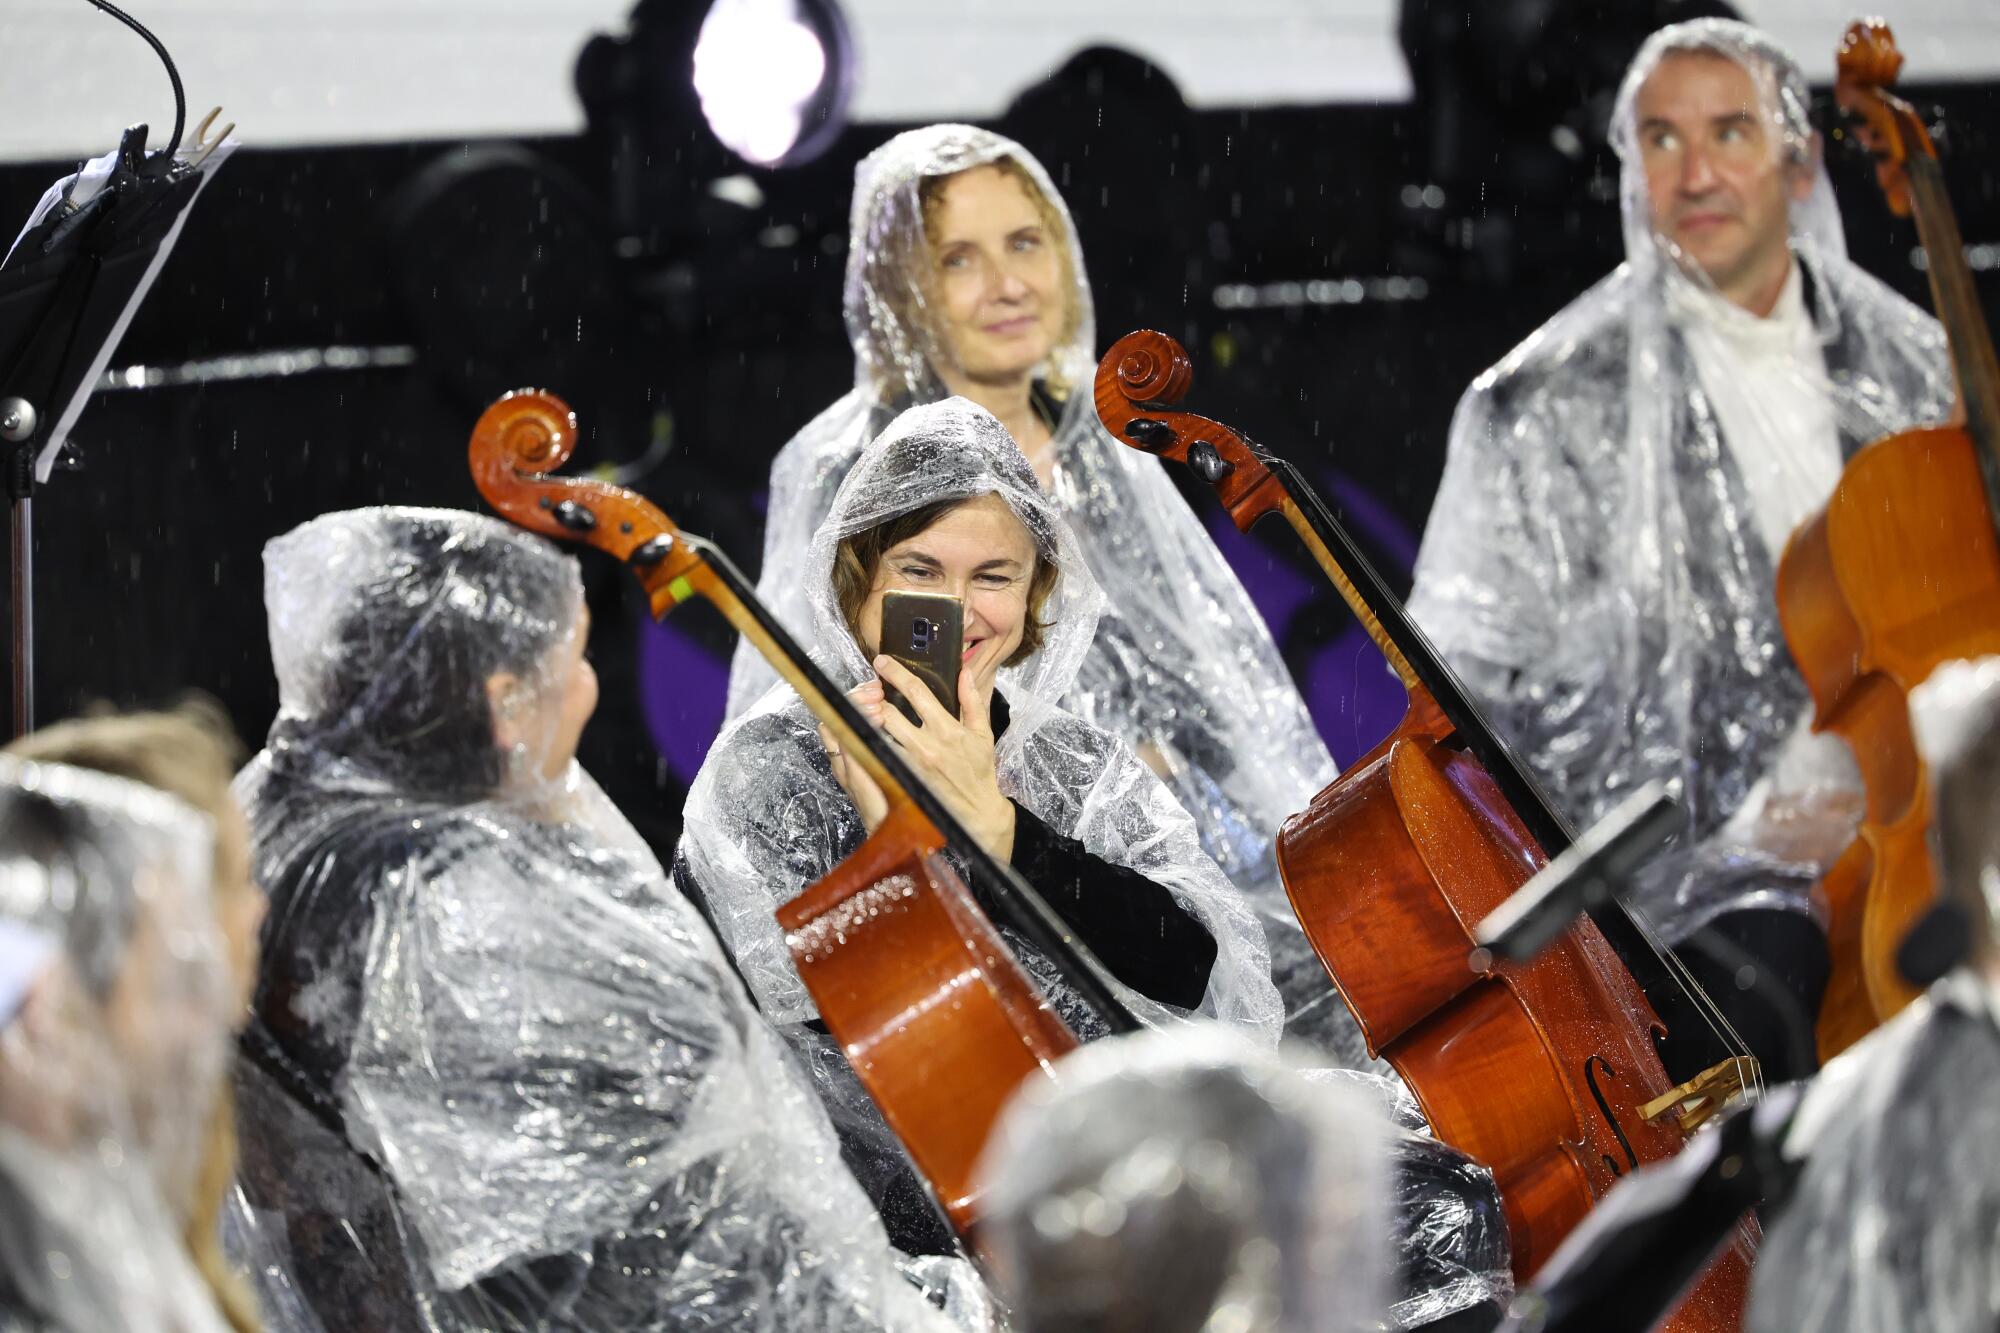 A musician takes a photo during the opening ceremony of the 2024 Summer Olympics in Paris.